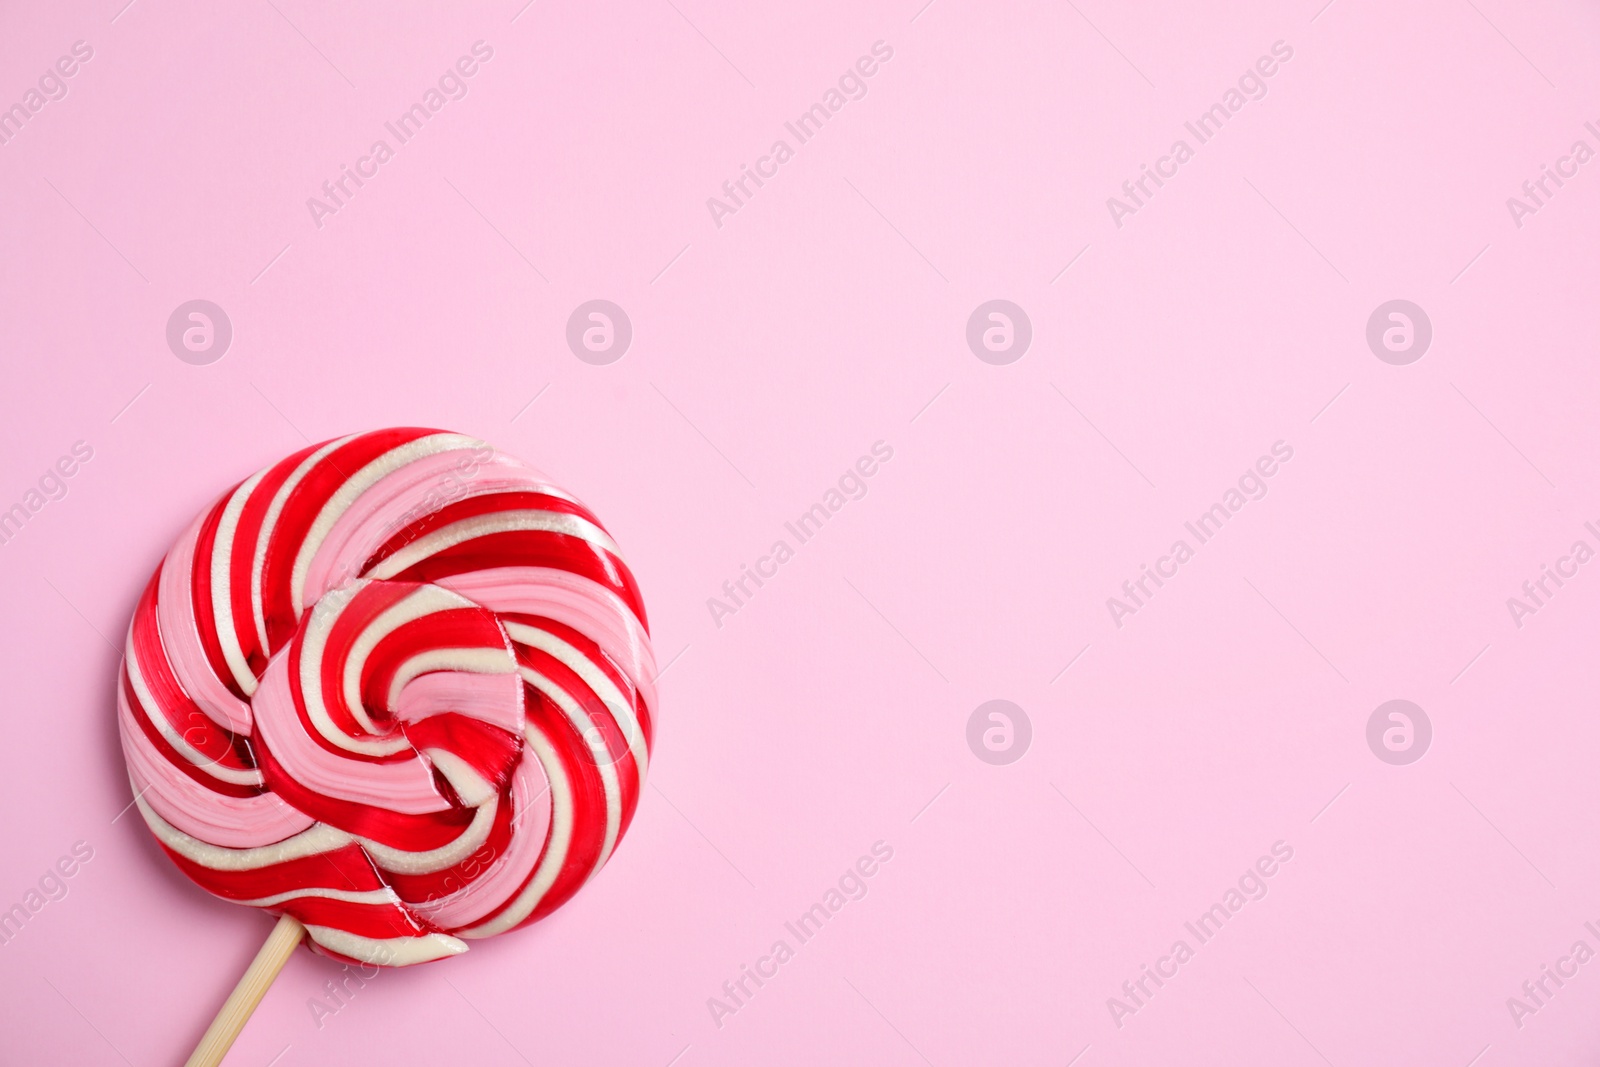 Photo of Stick with colorful lollipop swirl on pink background, top view. Space for text